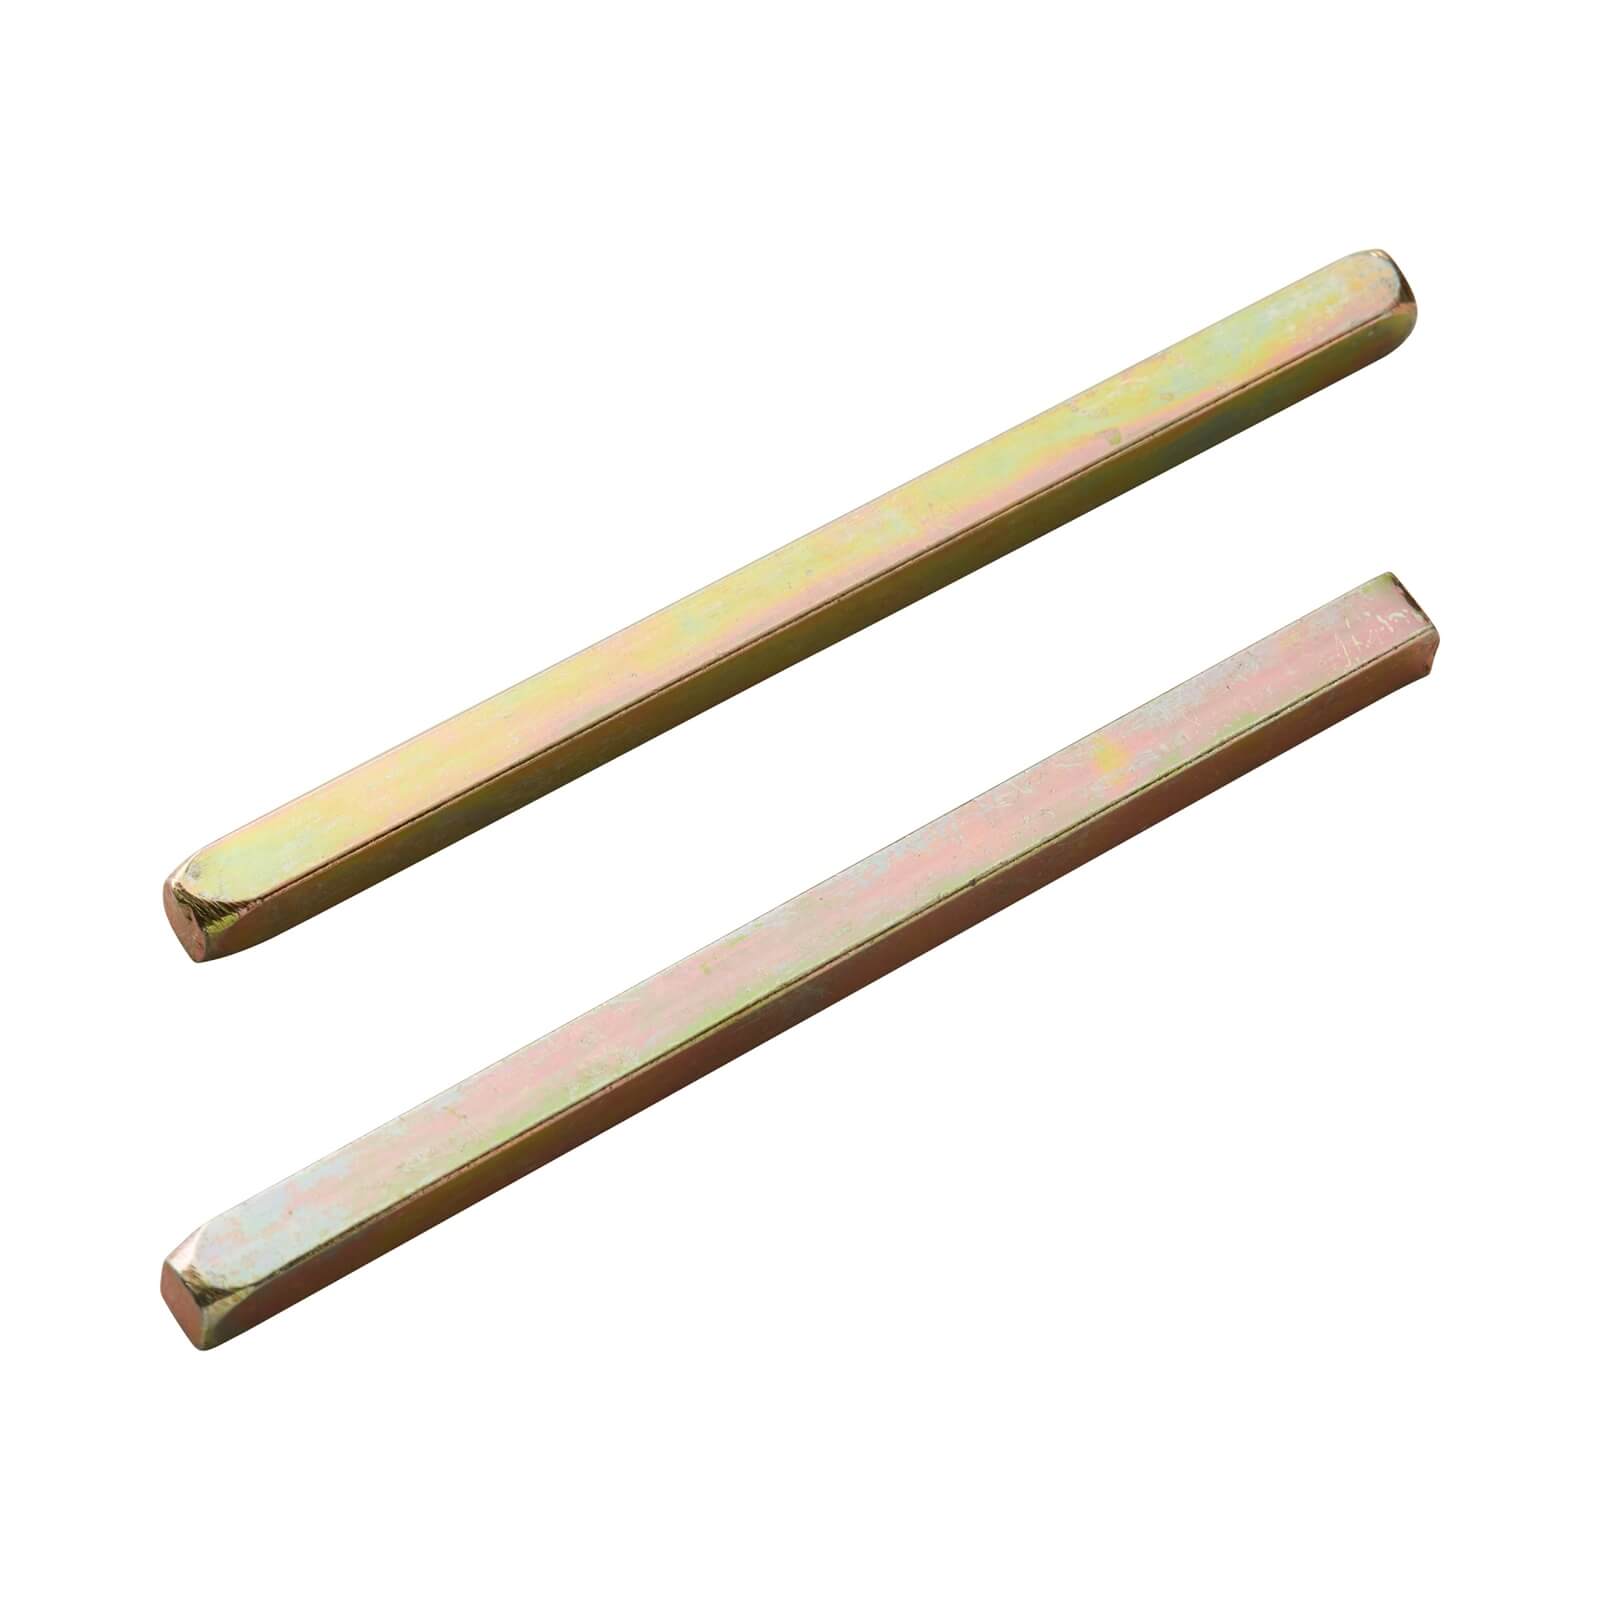 Spare Spindles Steel 8mm x 85mm - Pack of 2